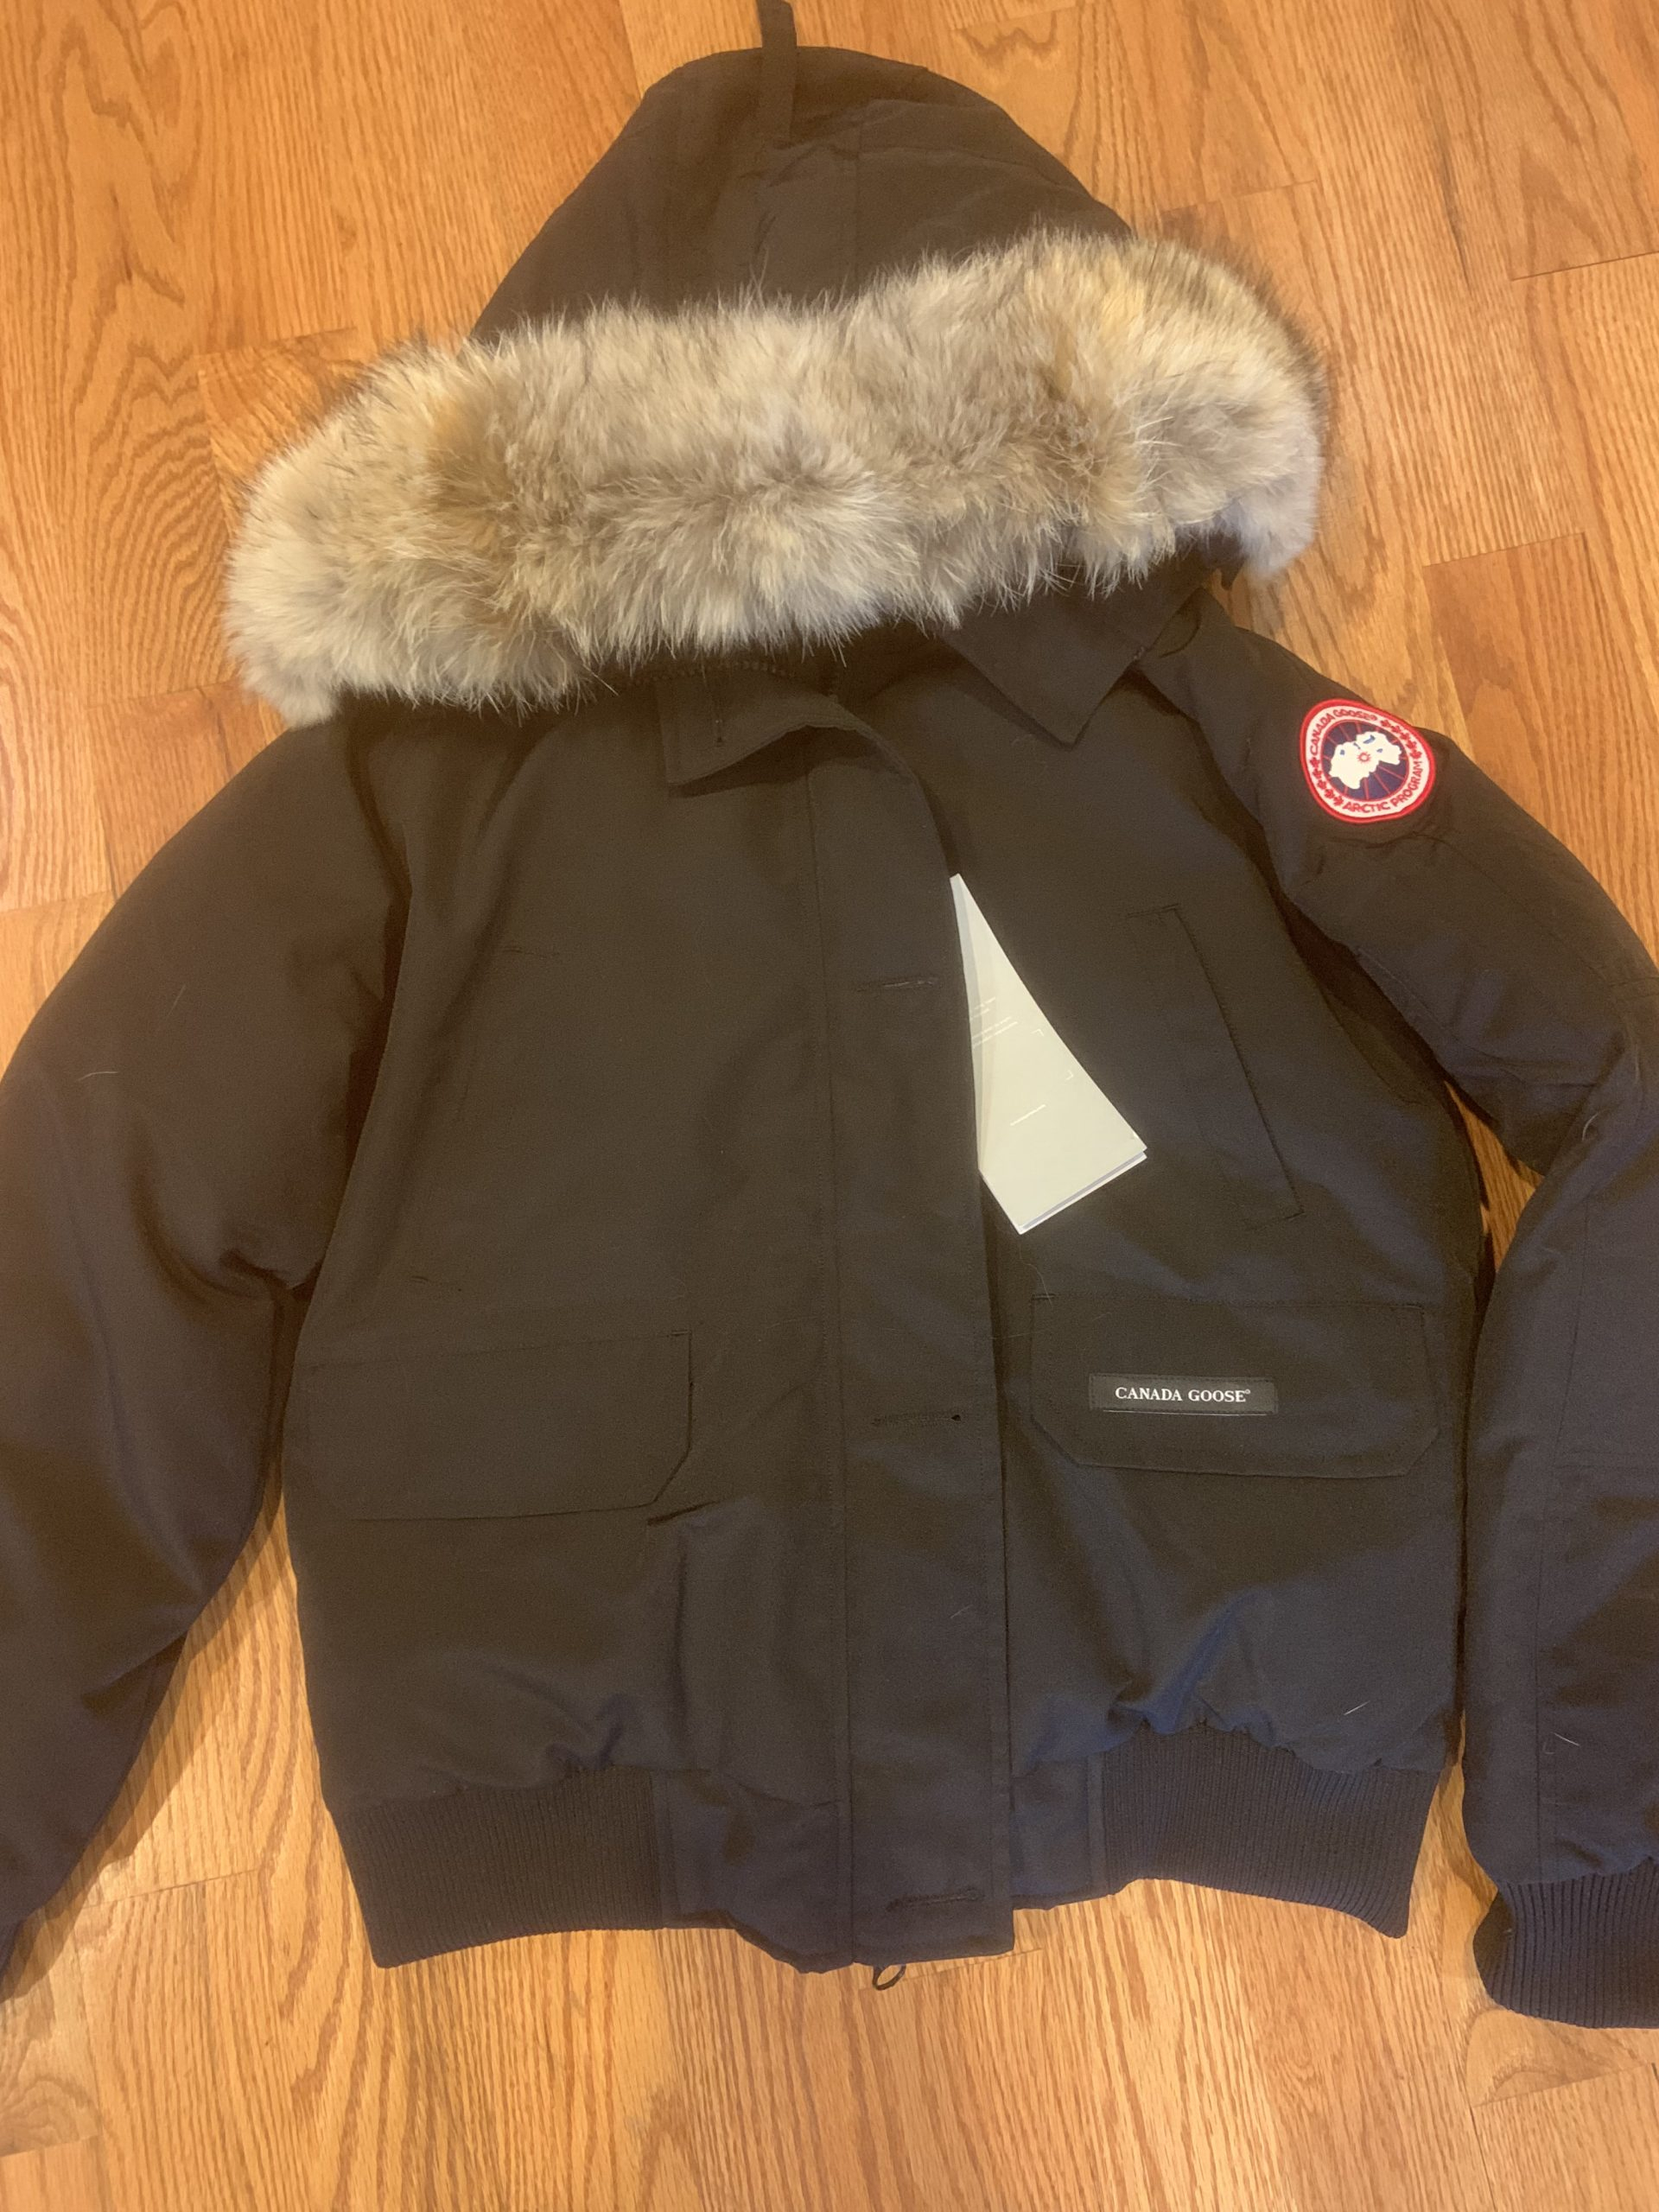 Women Canada goose inspired coat NWT size L